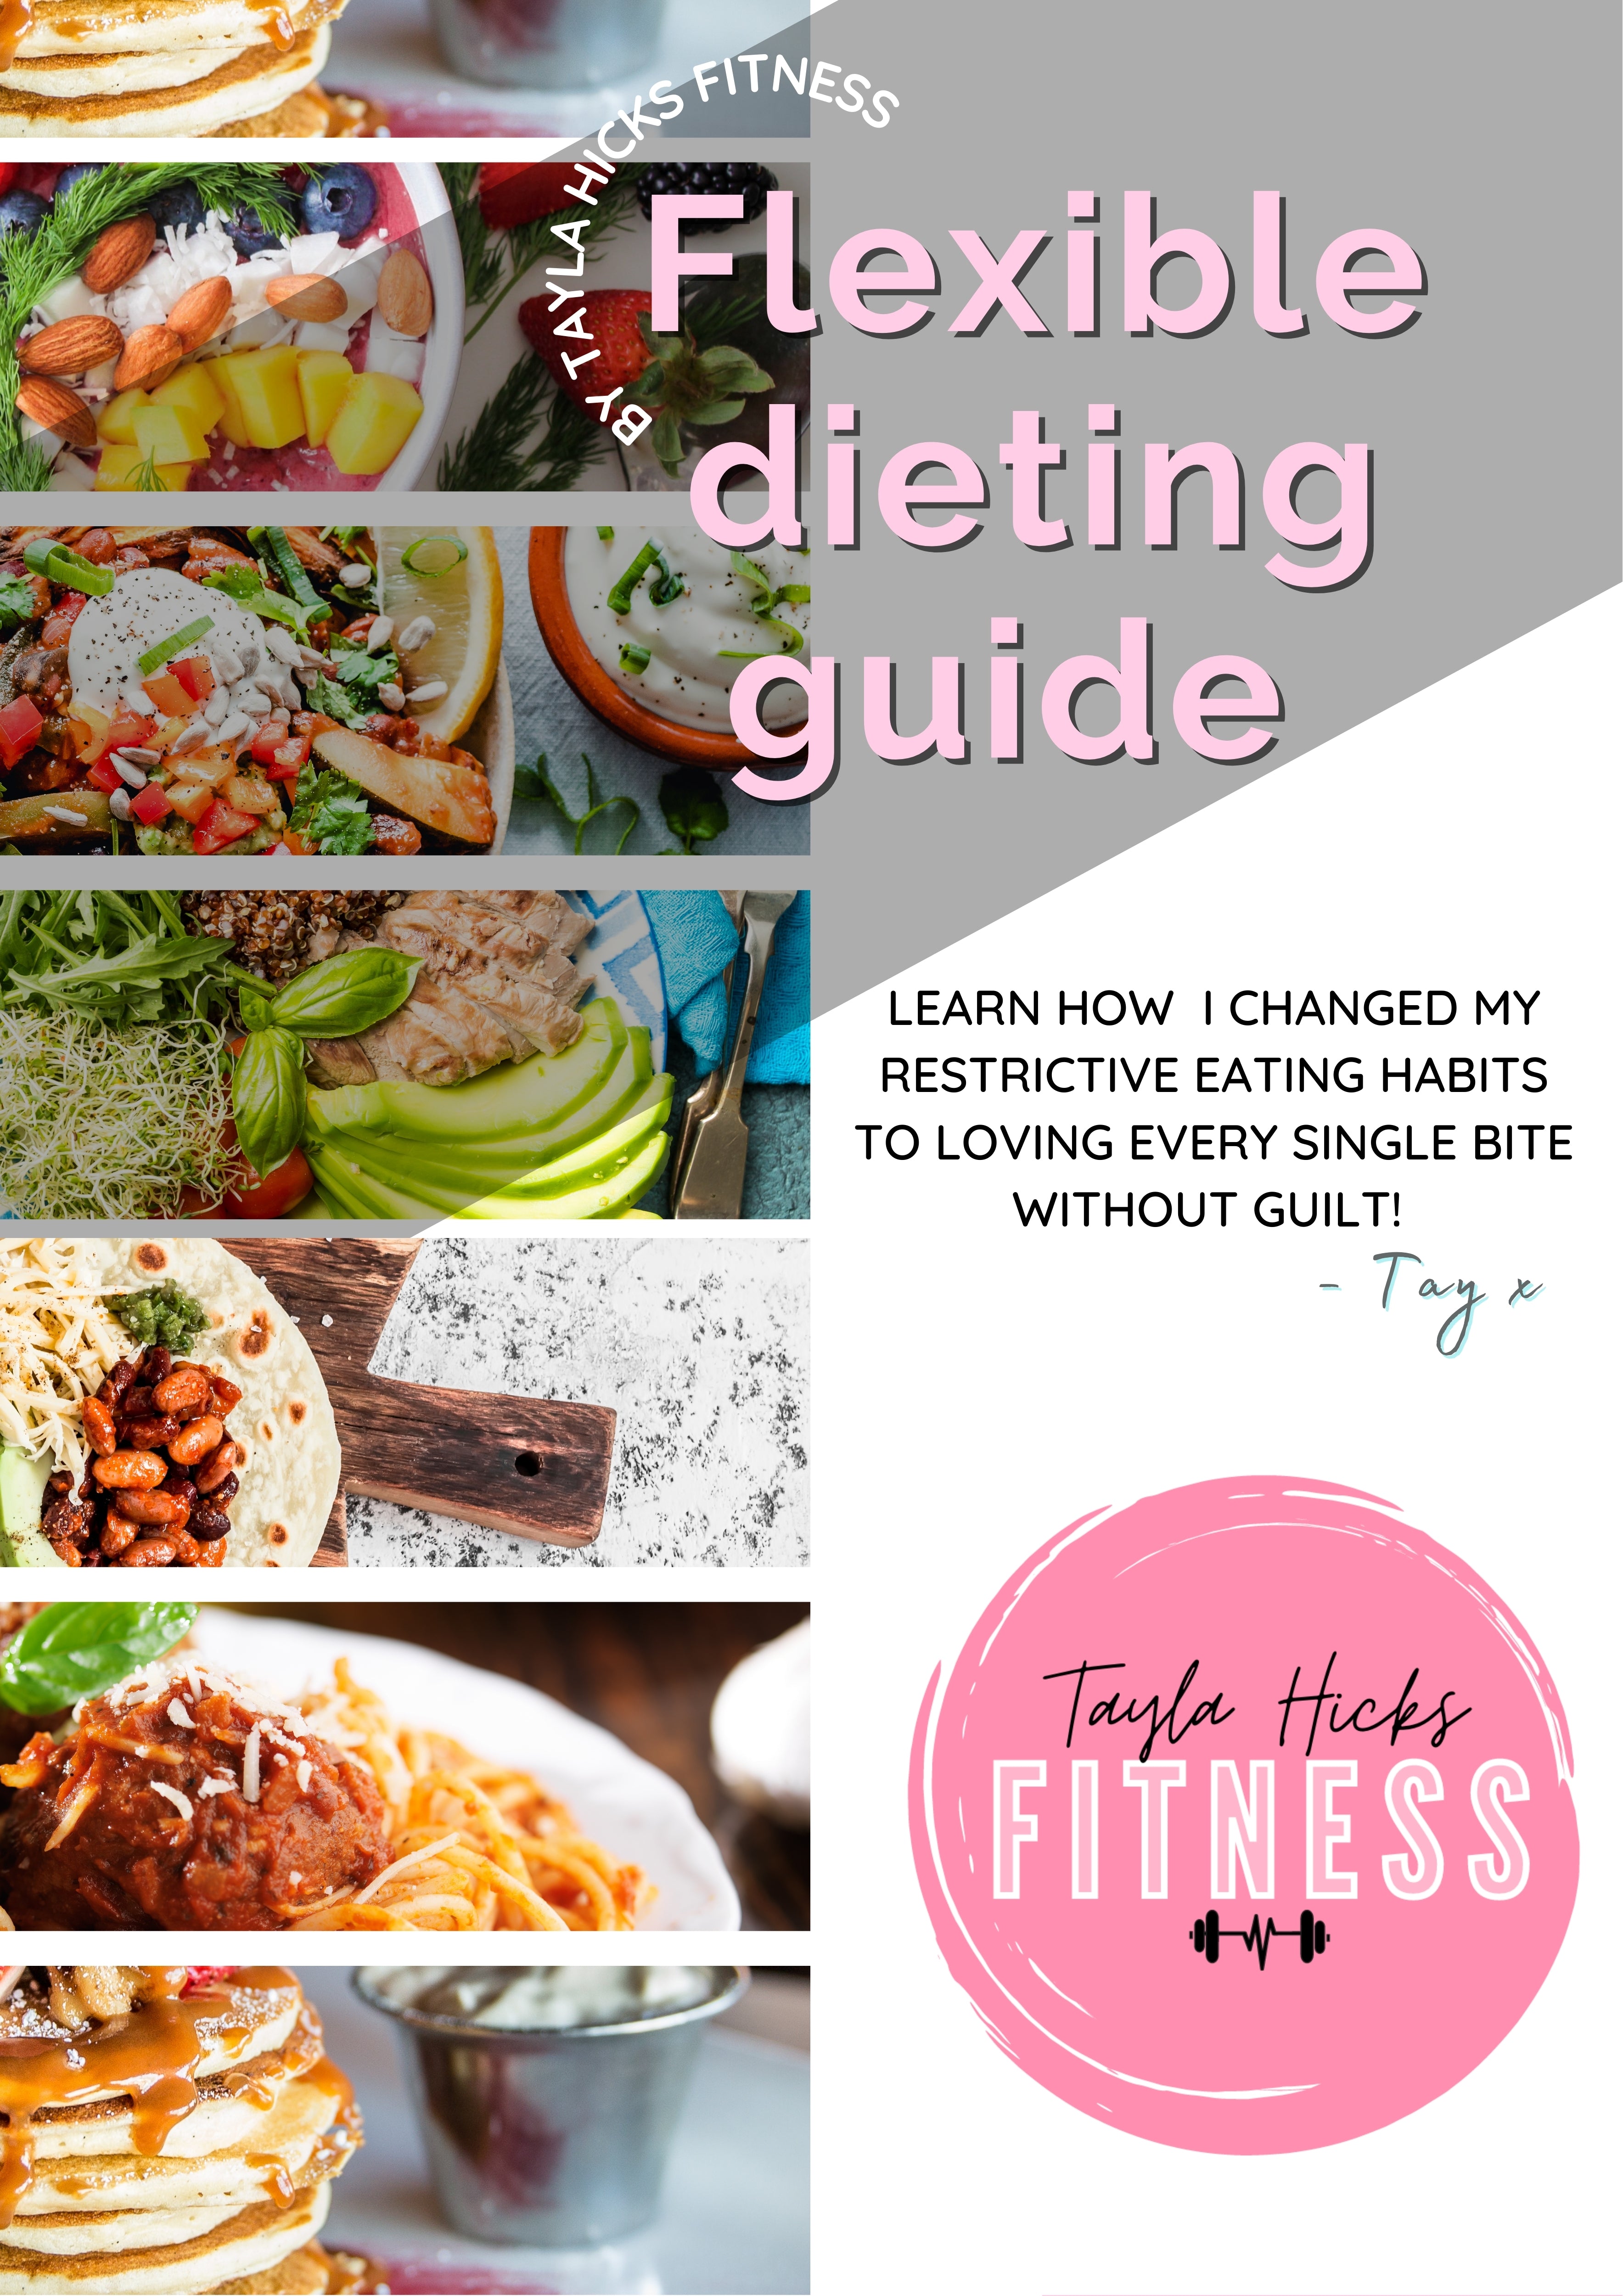 Best Practices, Tools, Tips and Tricks for Flexible Dieting